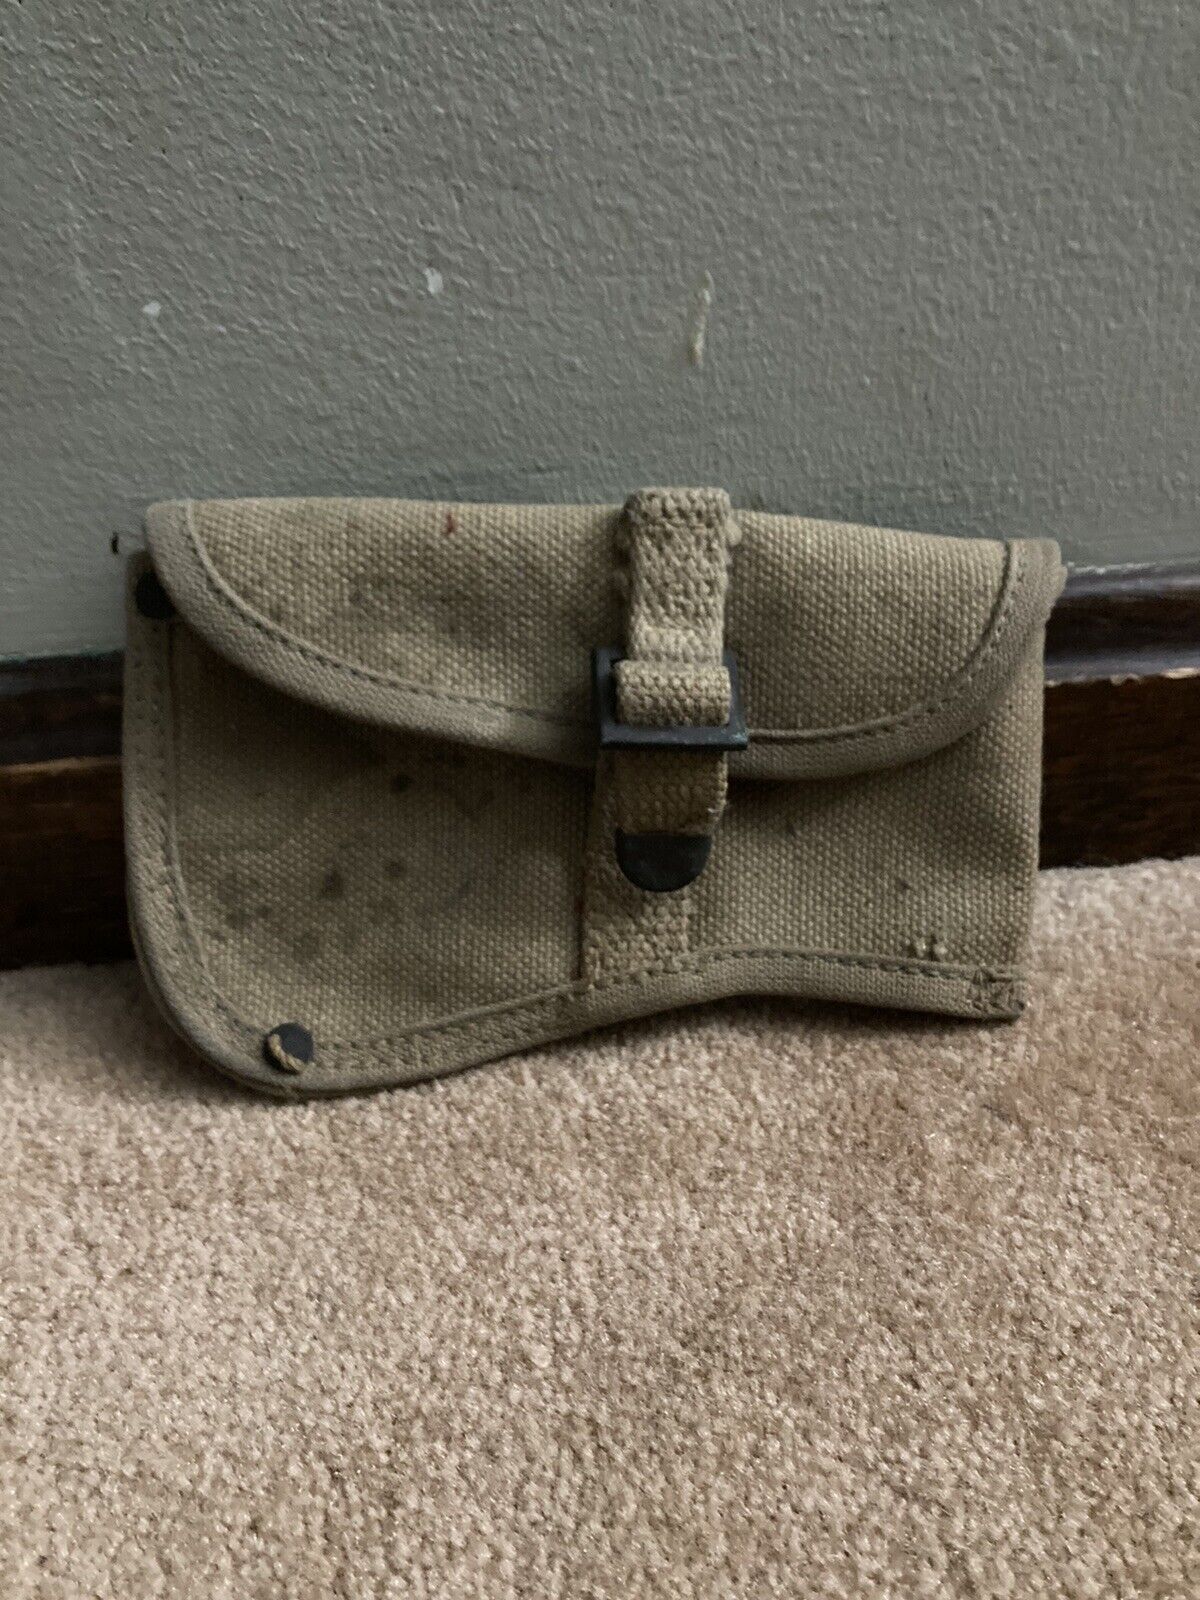 Canvas Products Co. Dated July 1918 WW1 Pouch/Holder Belt Attachment